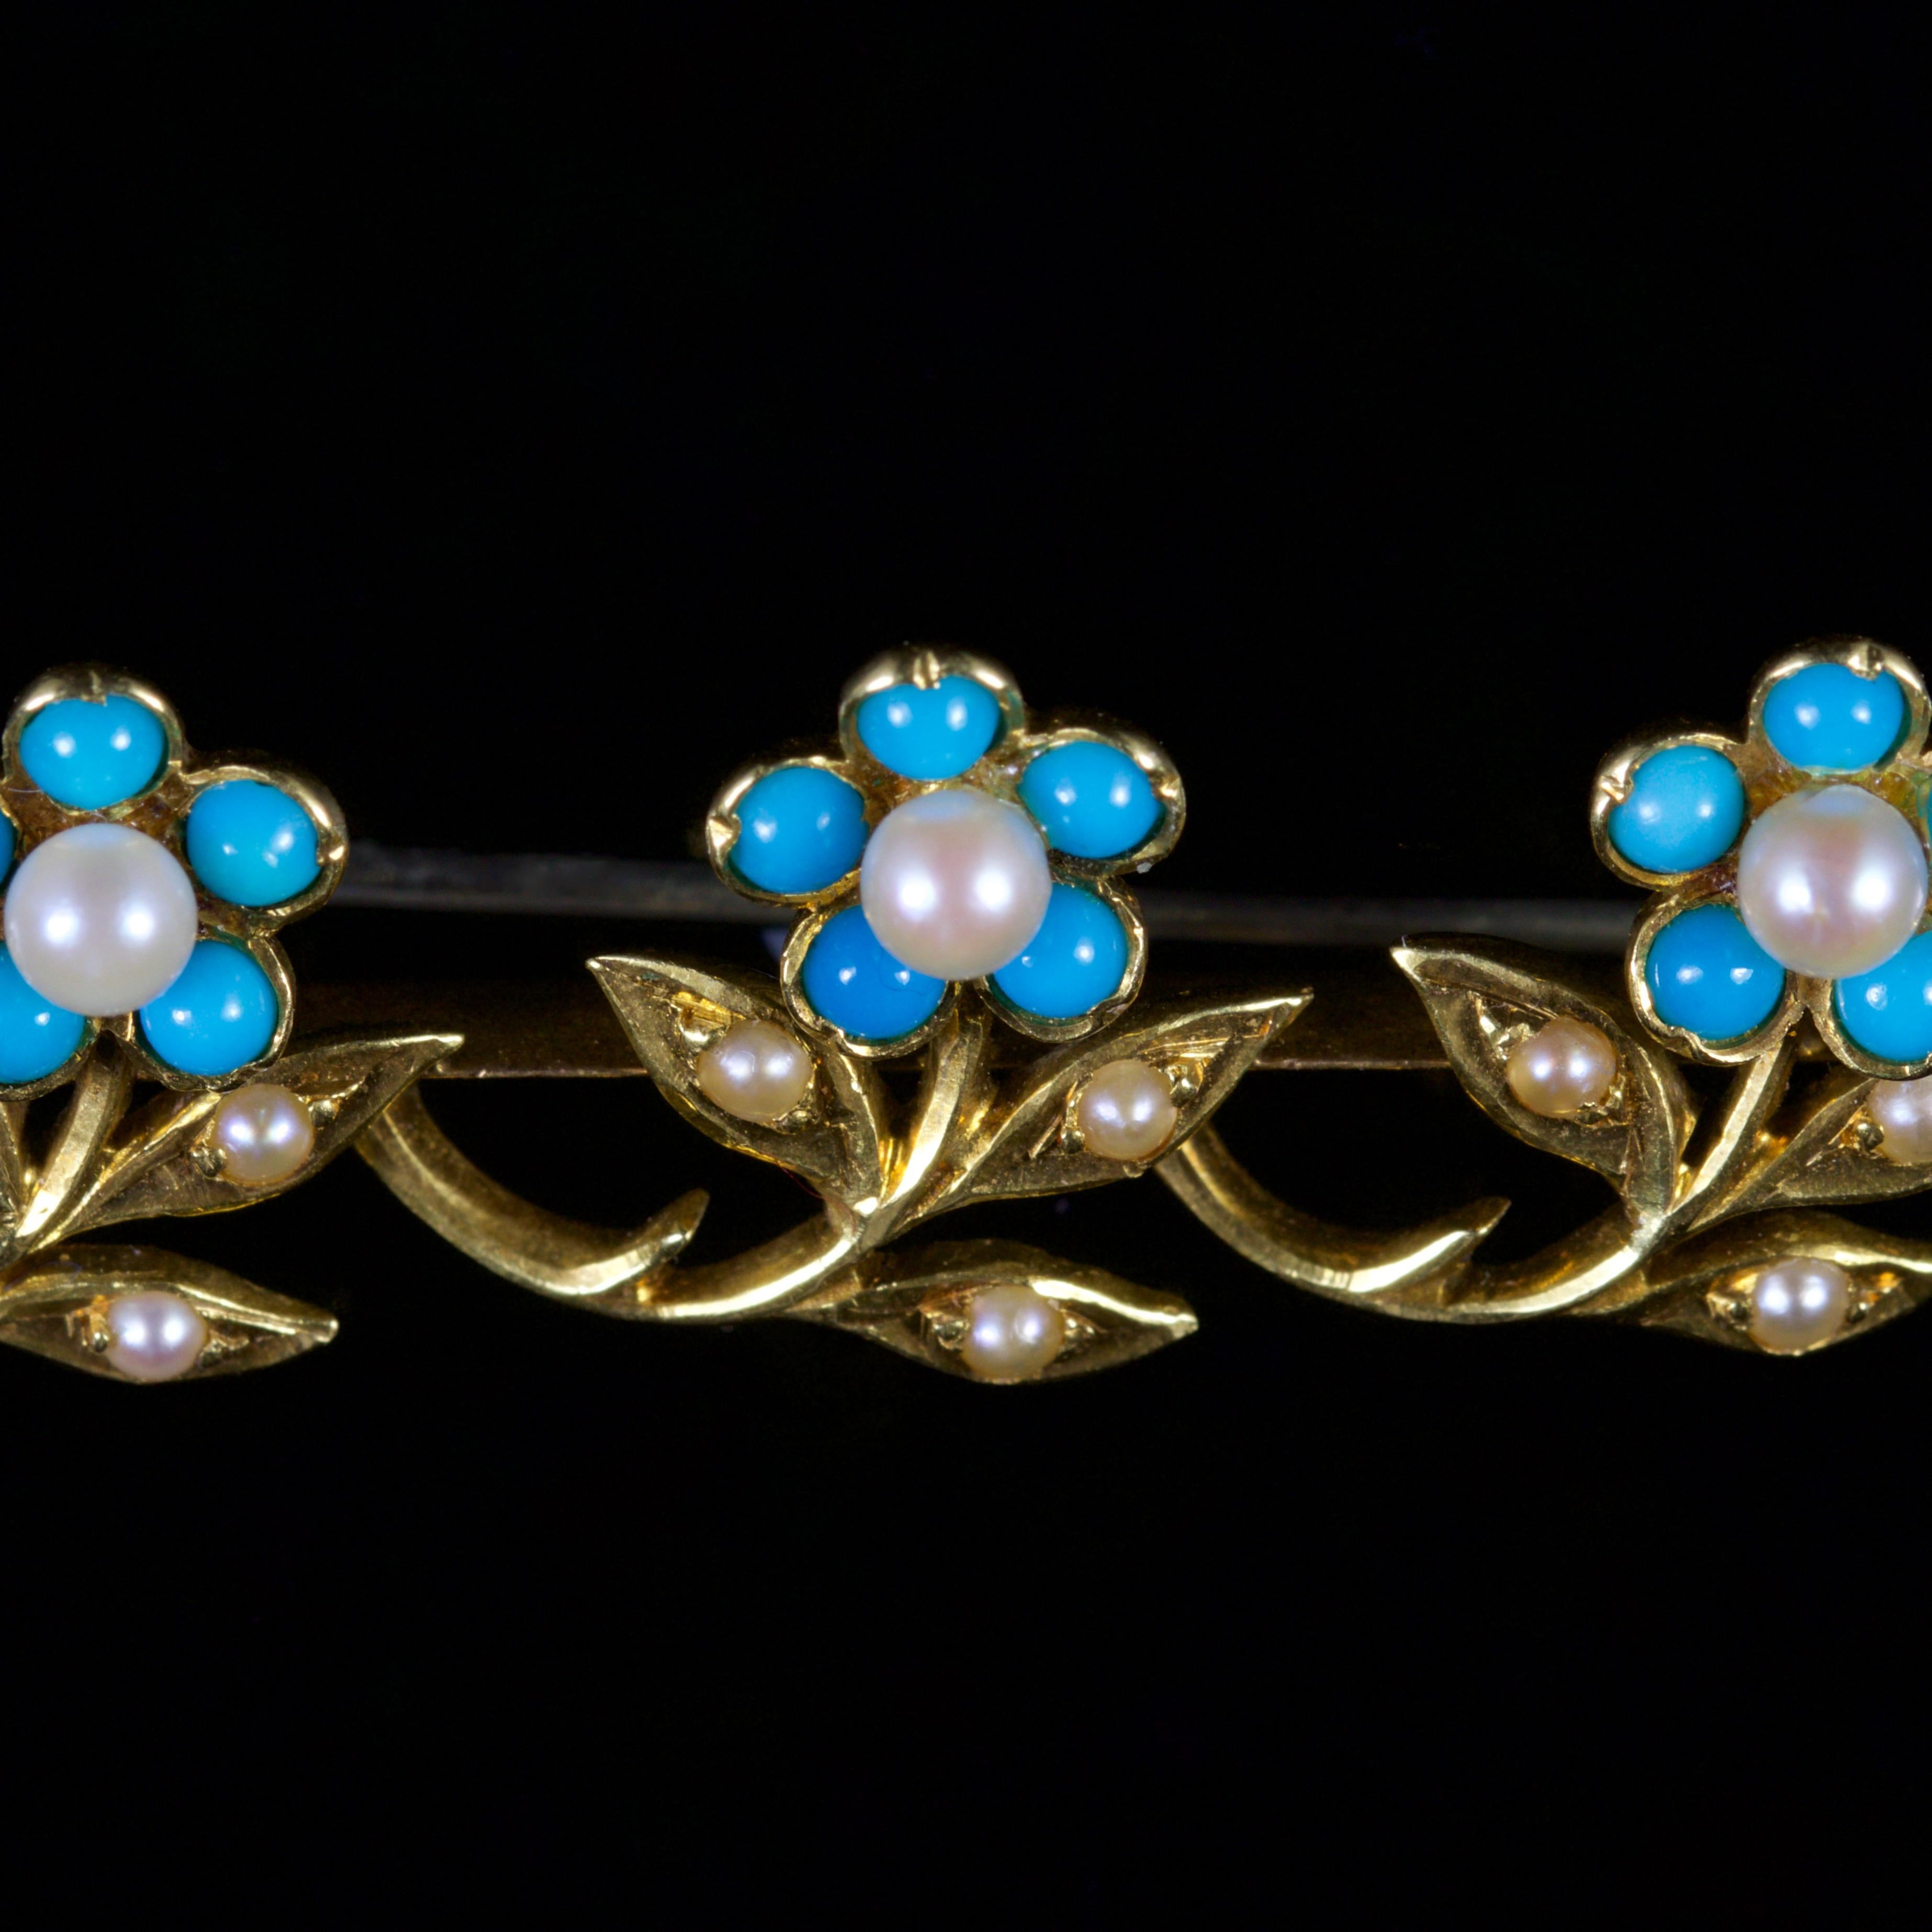 This elegant Victorian 18ct Gold Turquoise and Pearl Brooch is, Circa 1880.

The brooch is decorated in a trilogy of forget me nots boasting Turquoises and Pearls, it is truly beautiful.

Forget-me-not, O Lord! is what a poor German knight shouted